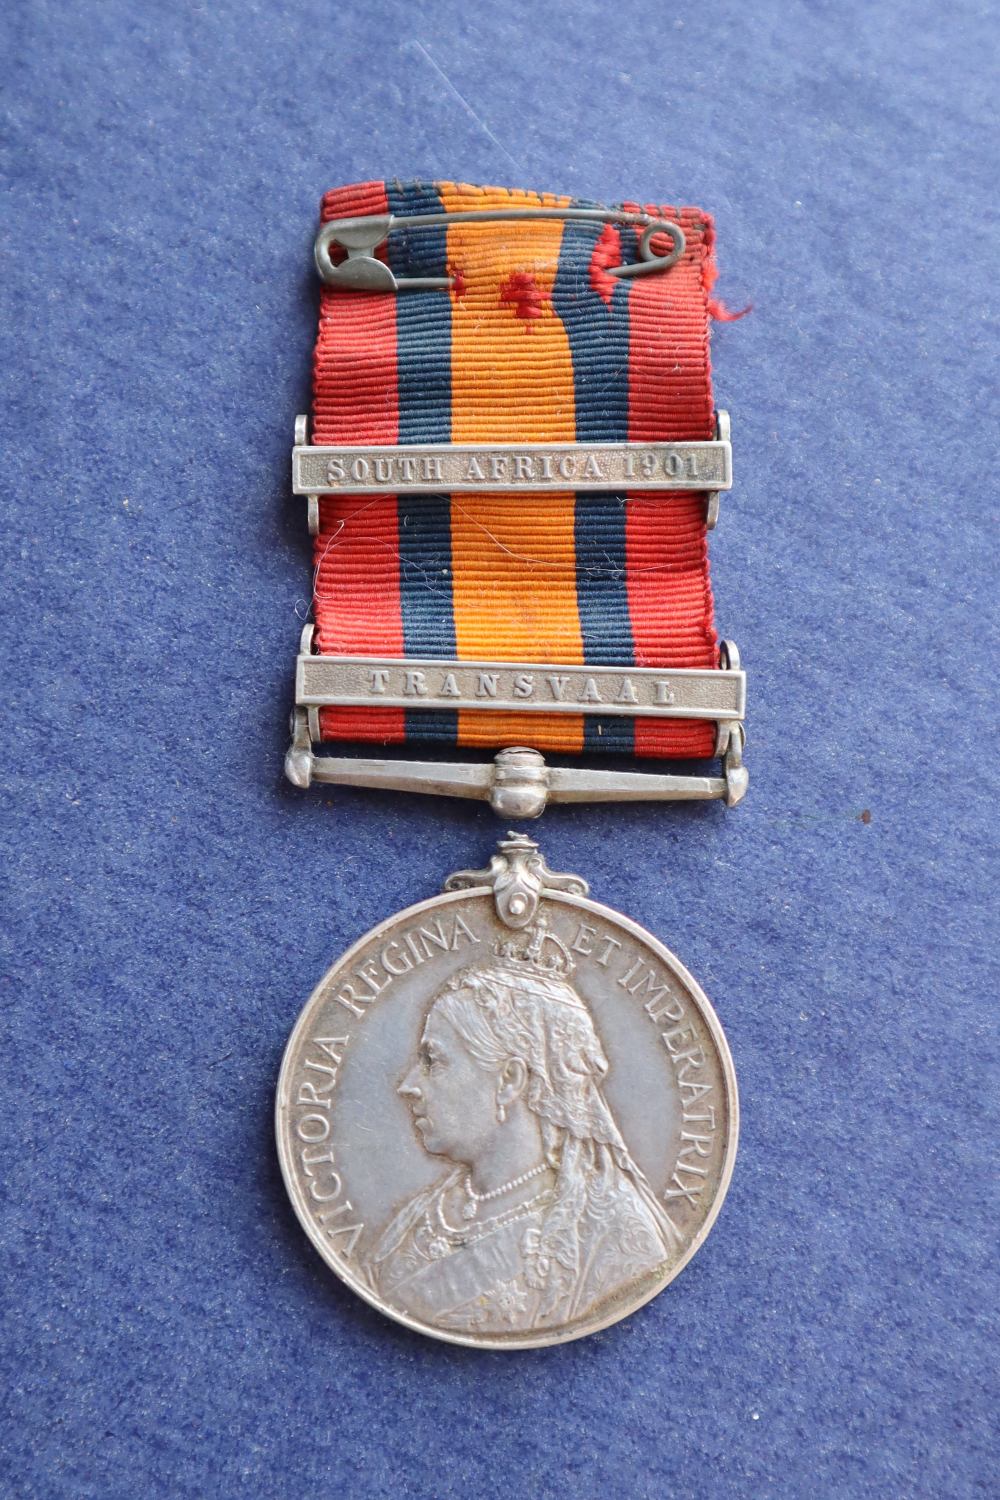 A Victorian South African medal with South Africa 1901 and Transvaal bars issued to "1163 Pte G J